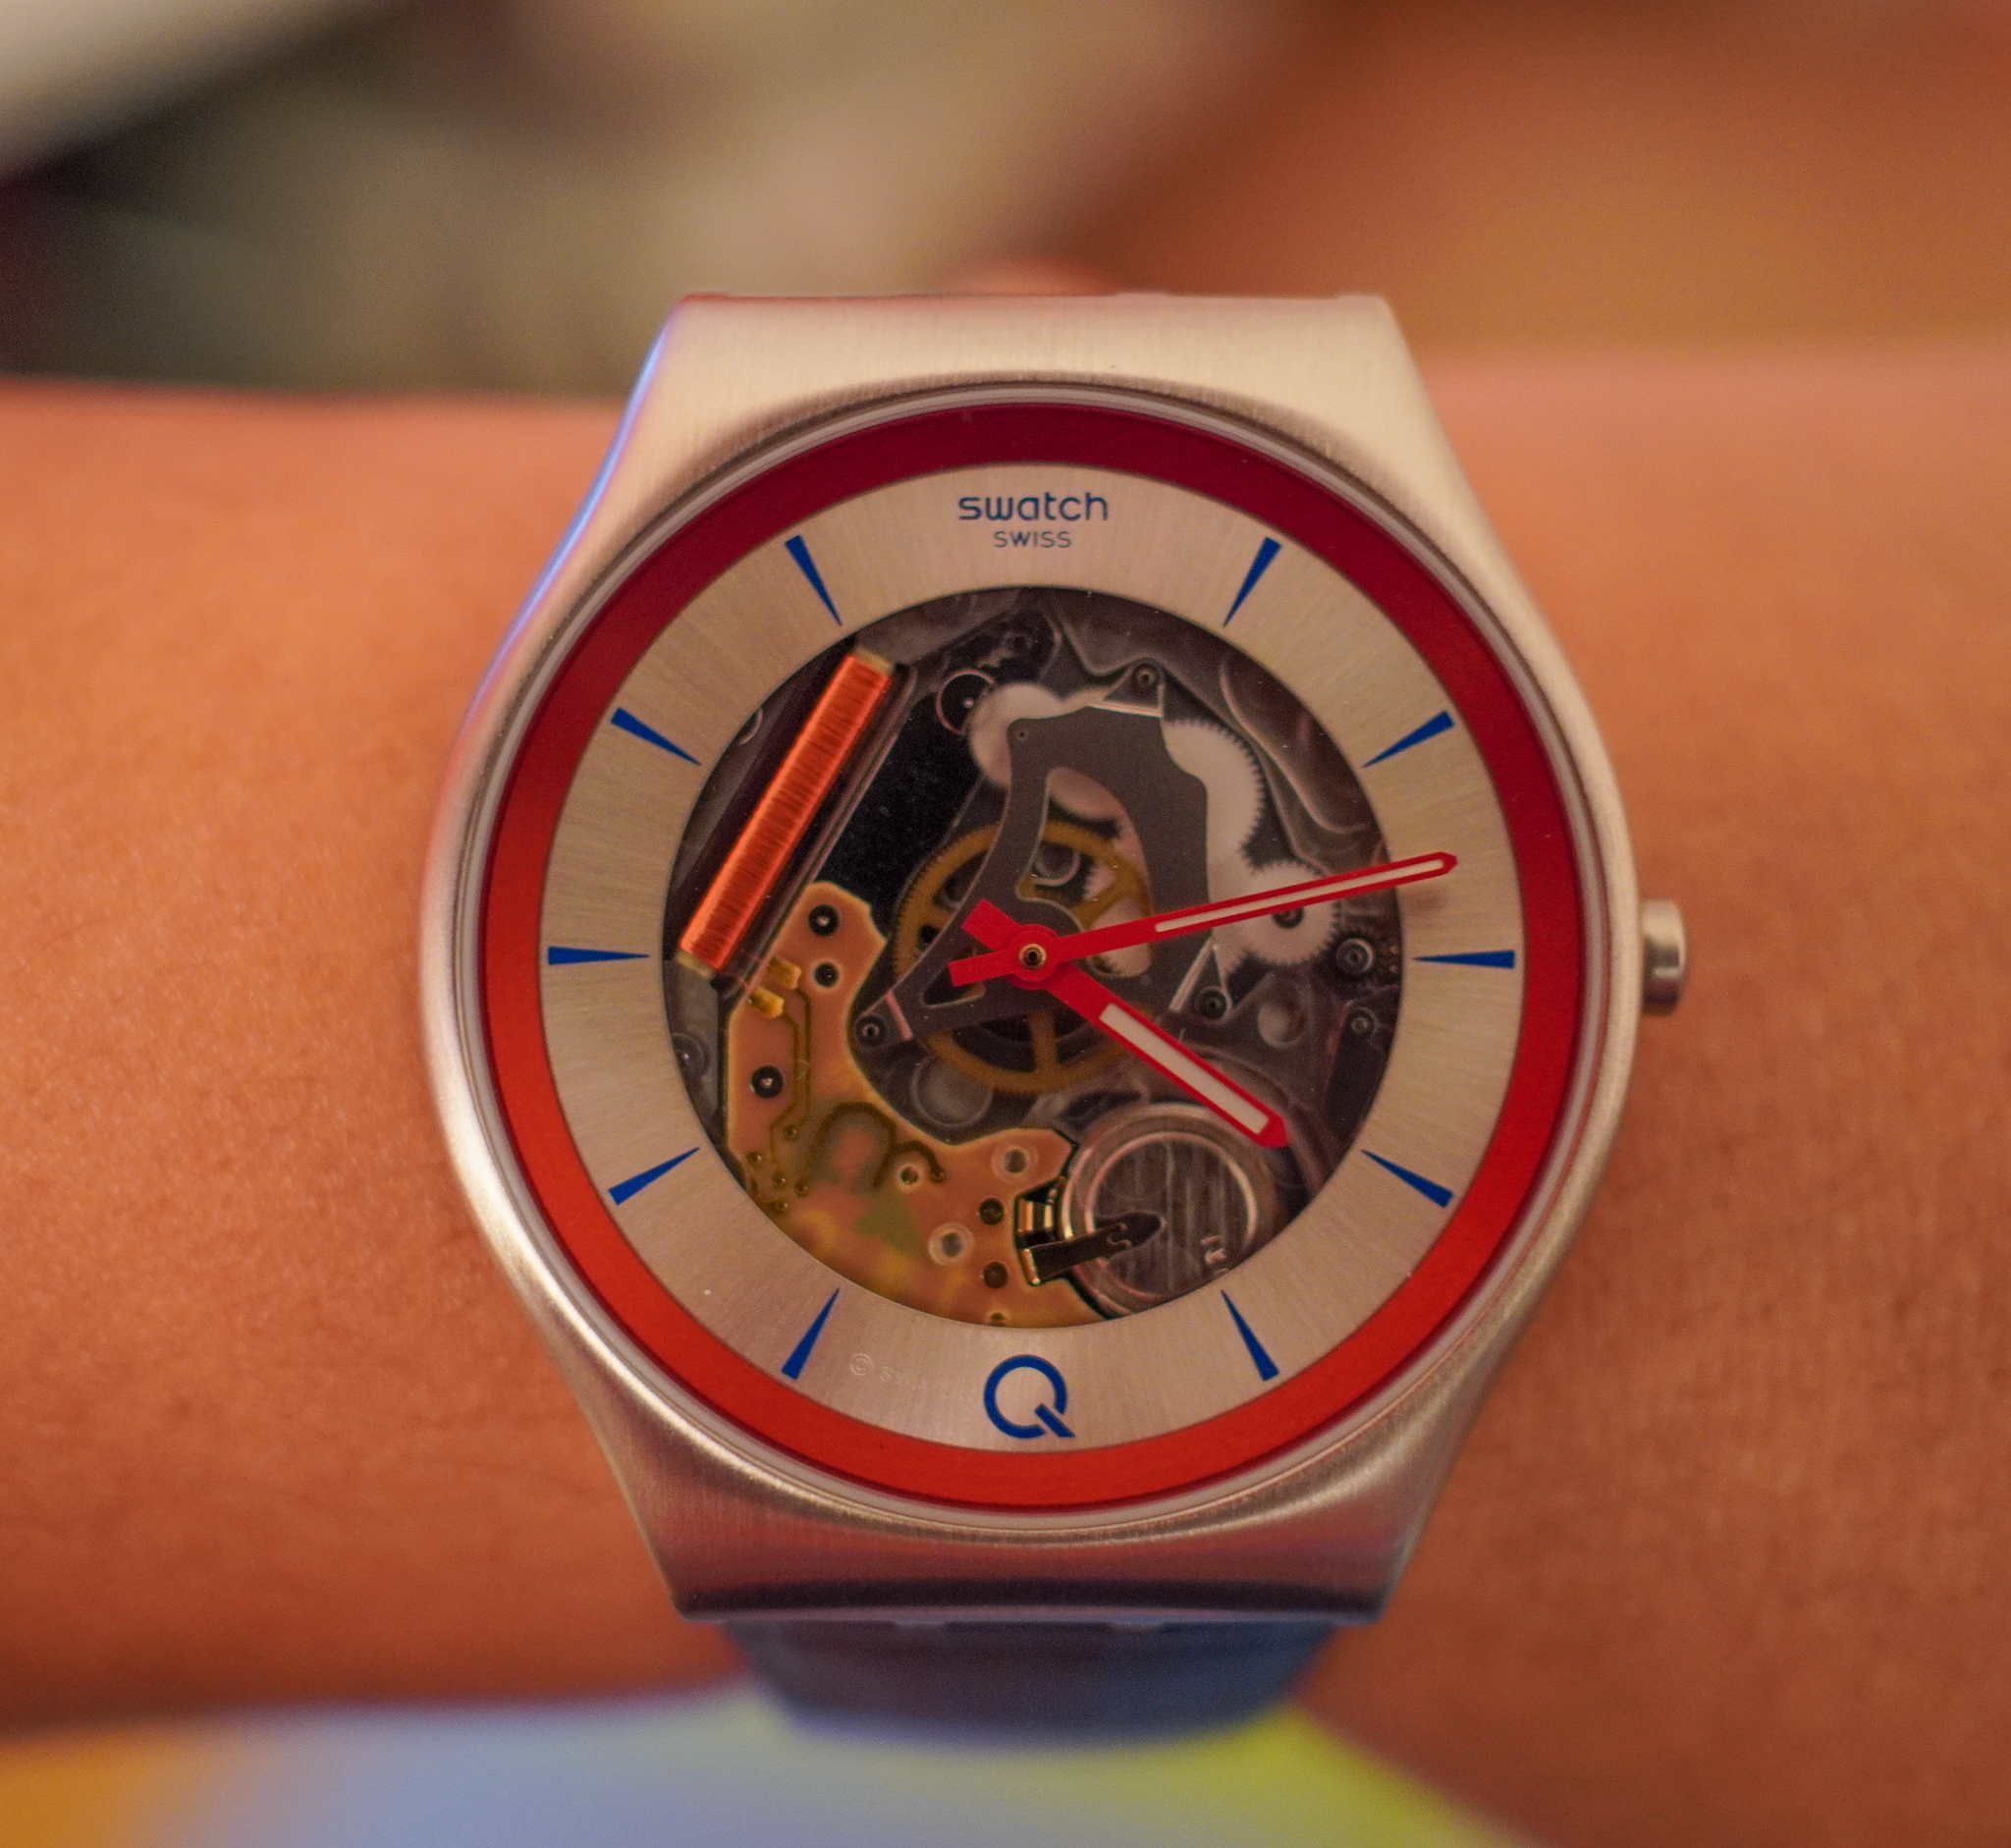 Owner Review: Swatch 007 “Q”